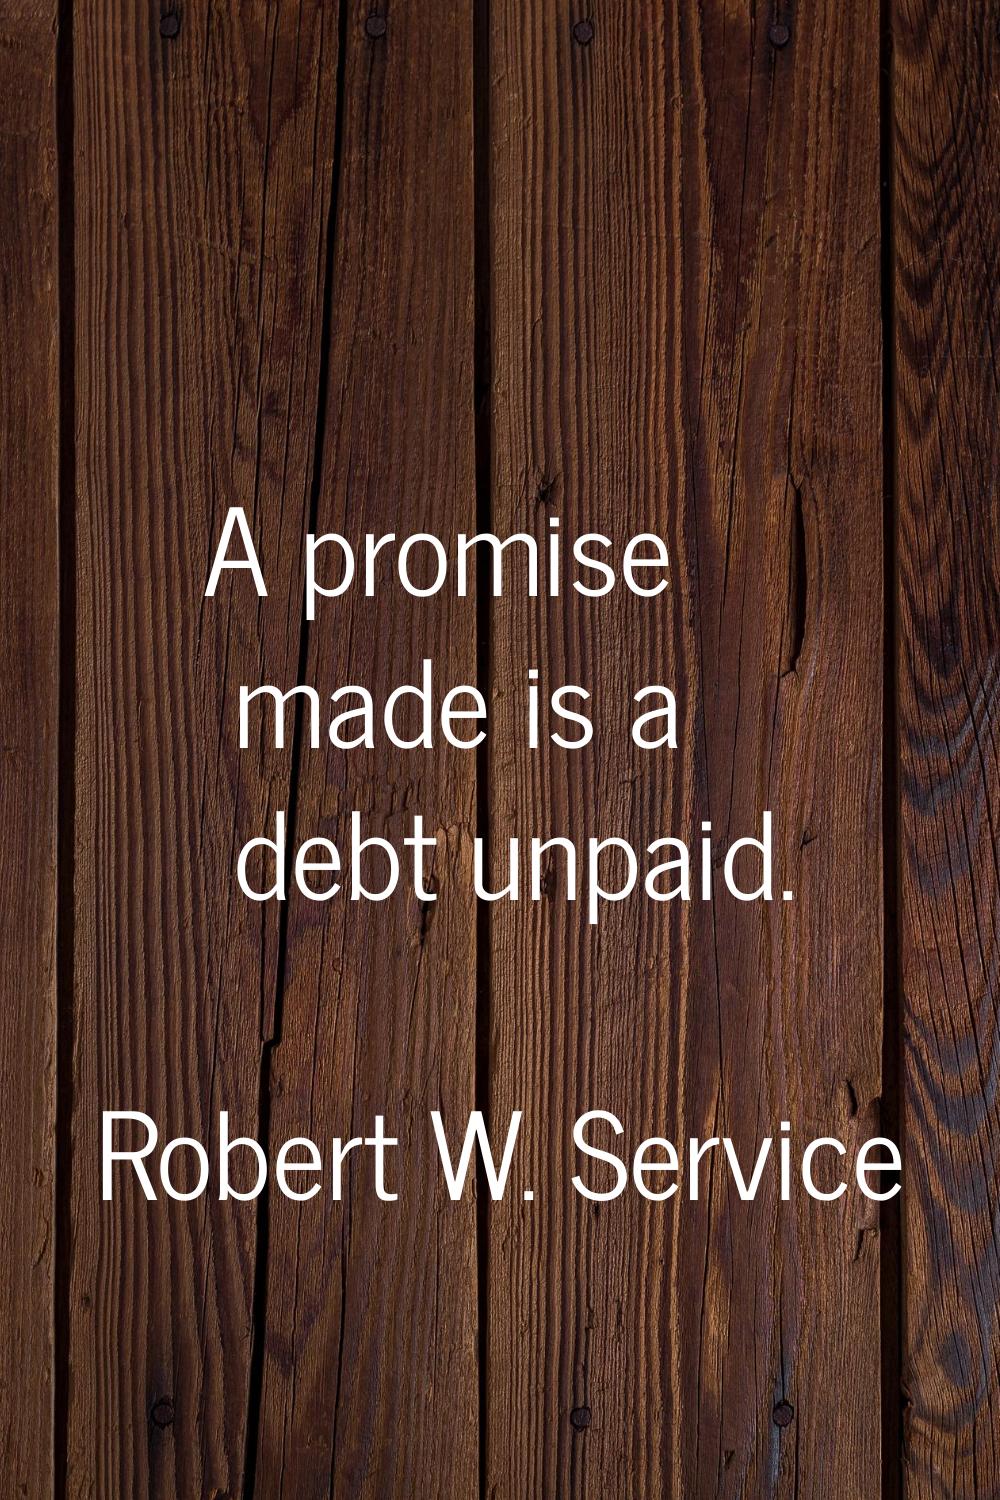 A promise made is a debt unpaid.